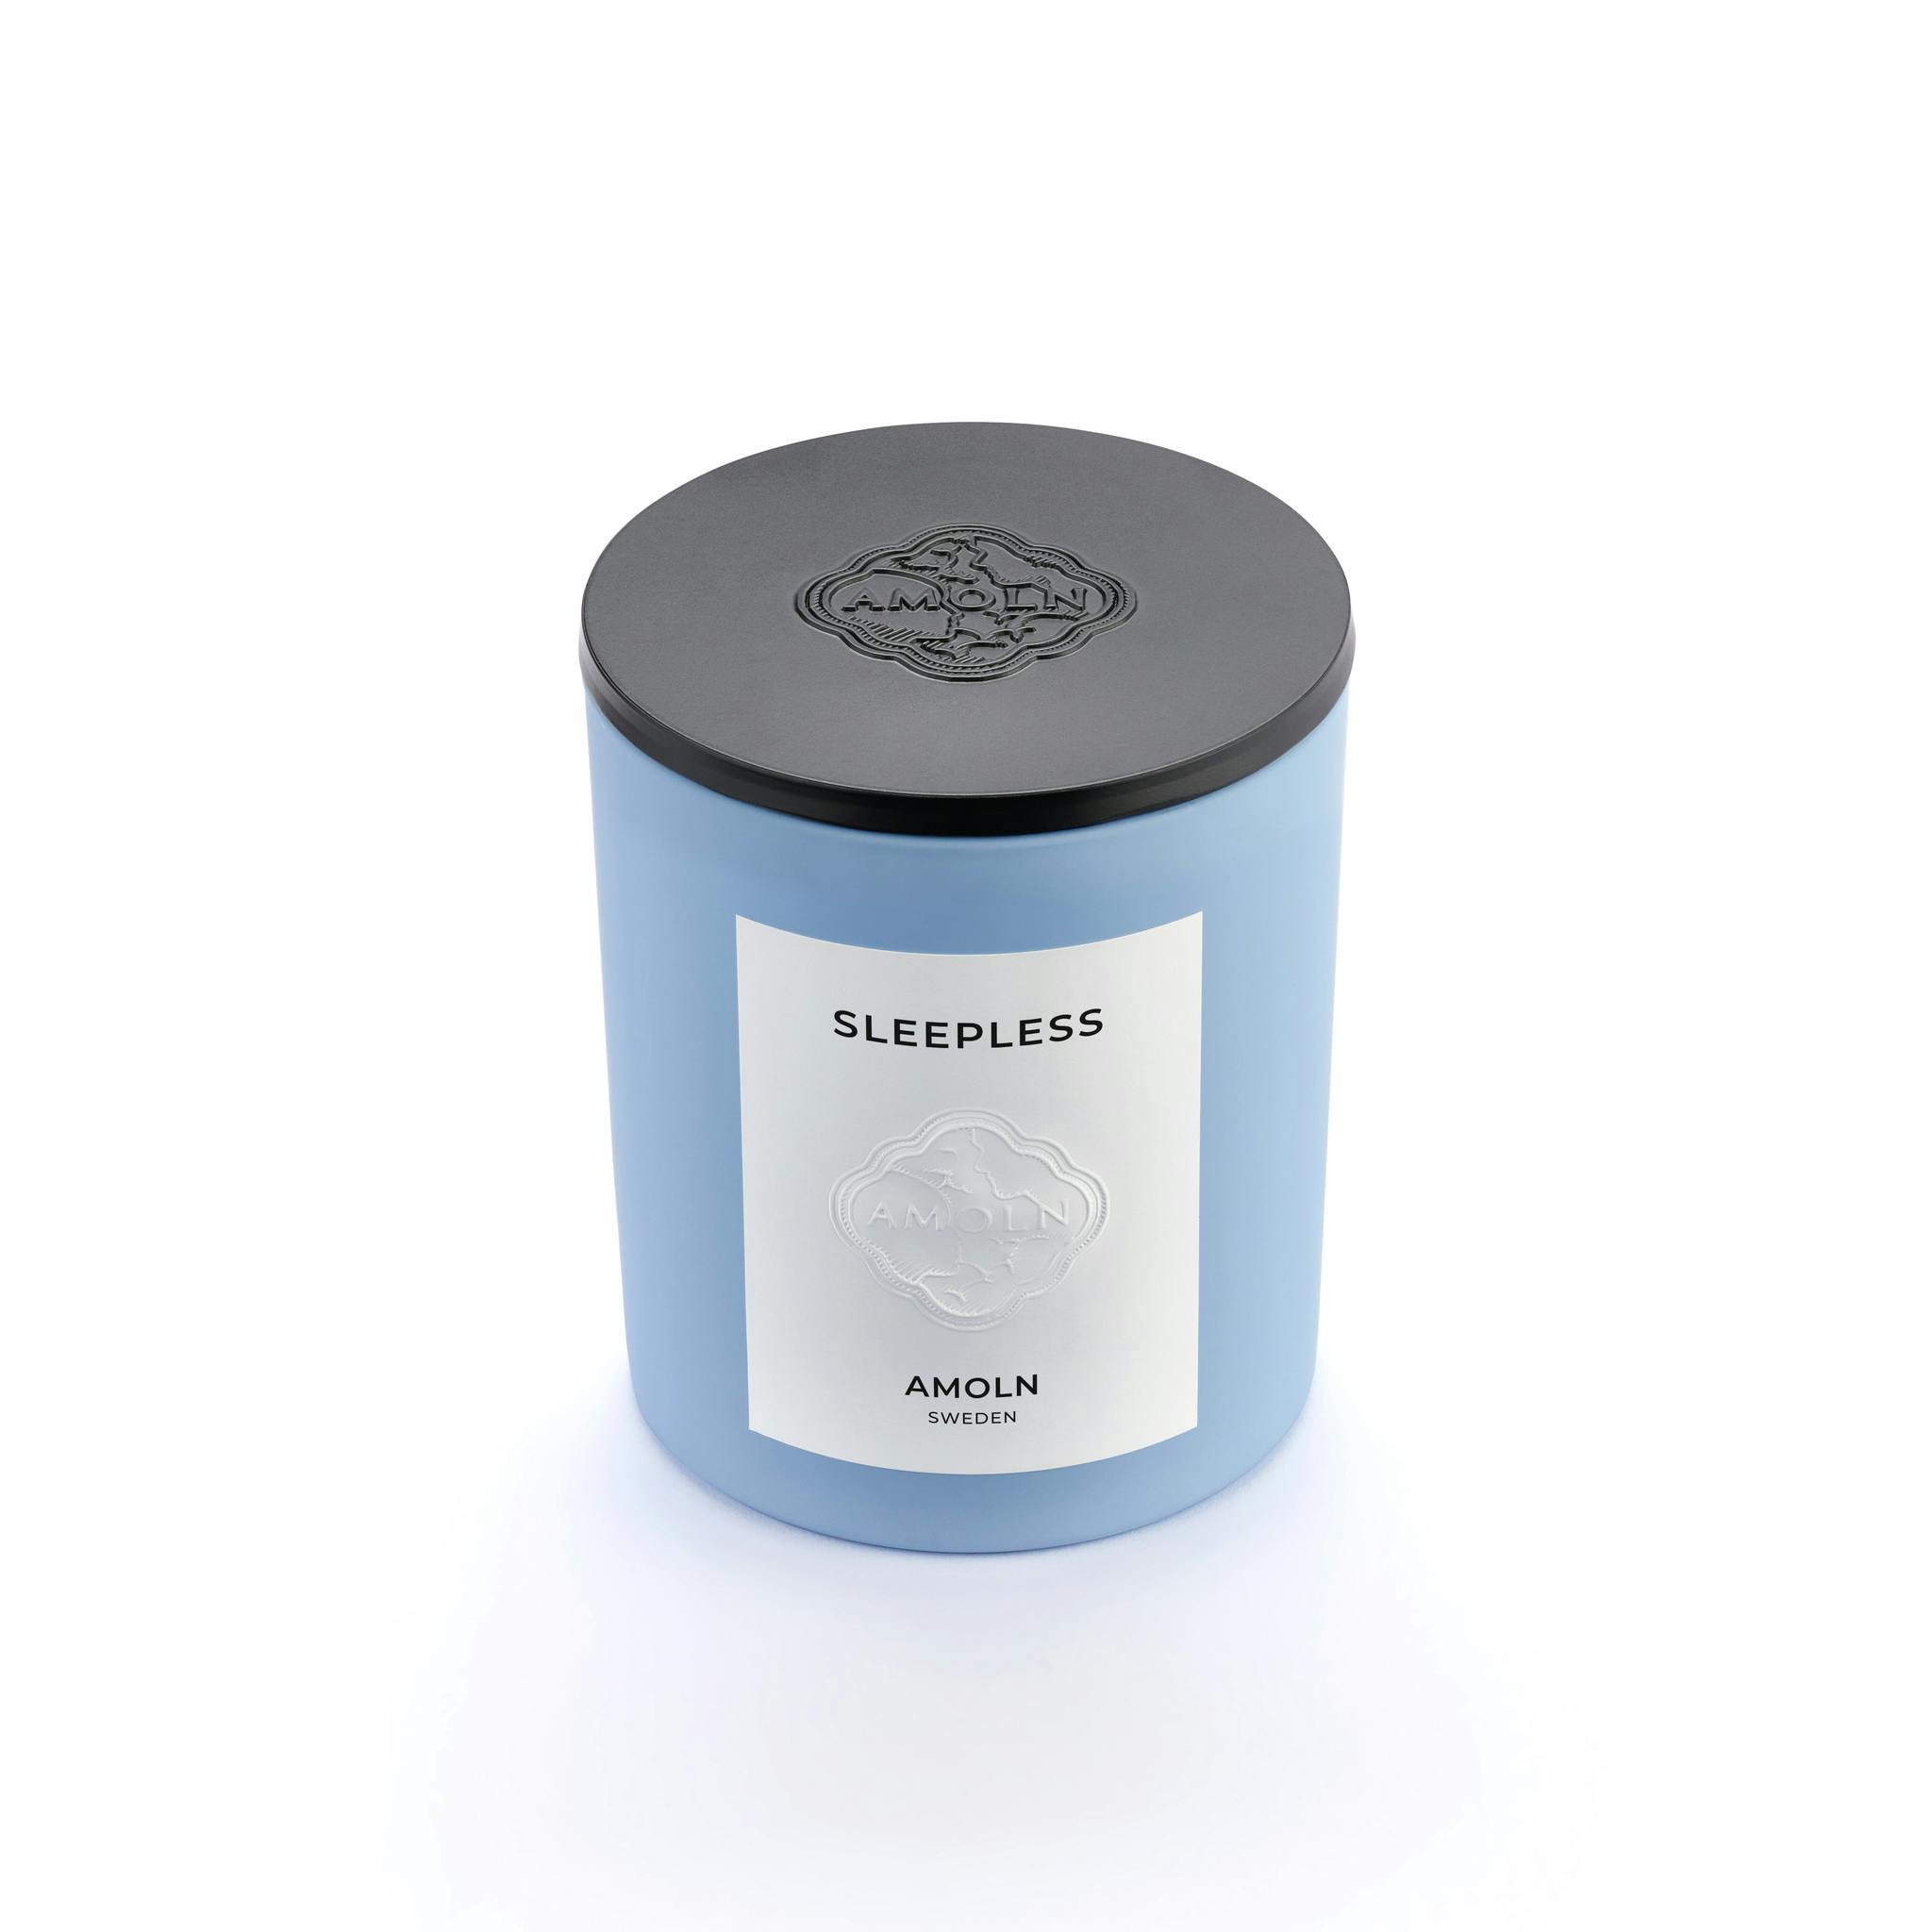 Light blue ceramic candle jar with a vegan, scented candle in blue wax with embossed metal lid. Handcrafted by artisans in Sweden. Sustainably & ethically made.